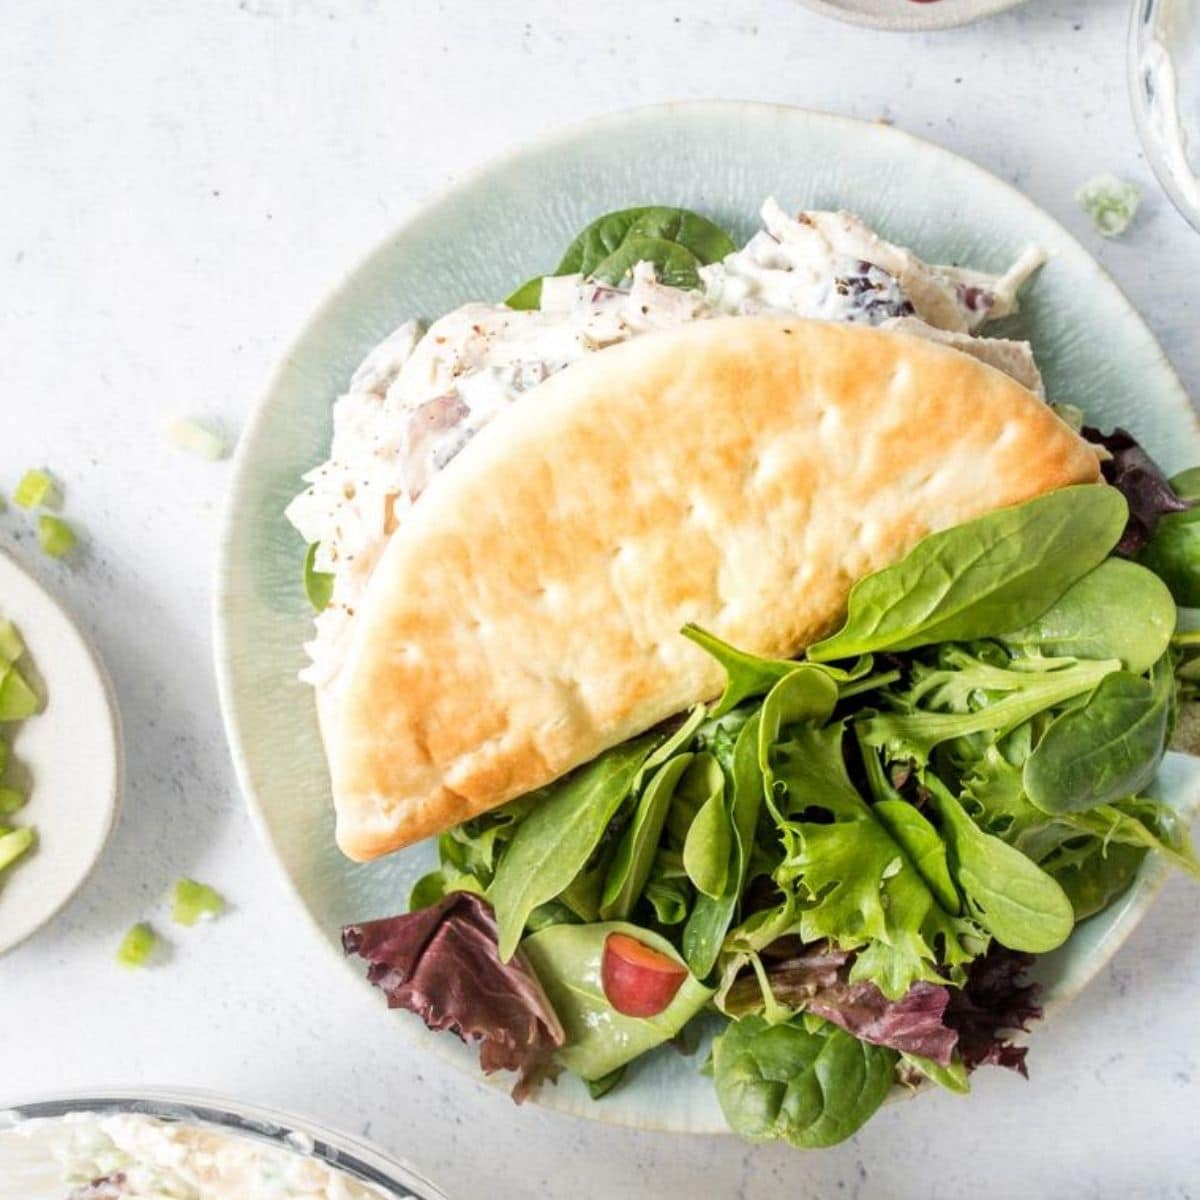 pita filled with chicken salad and salad on plate